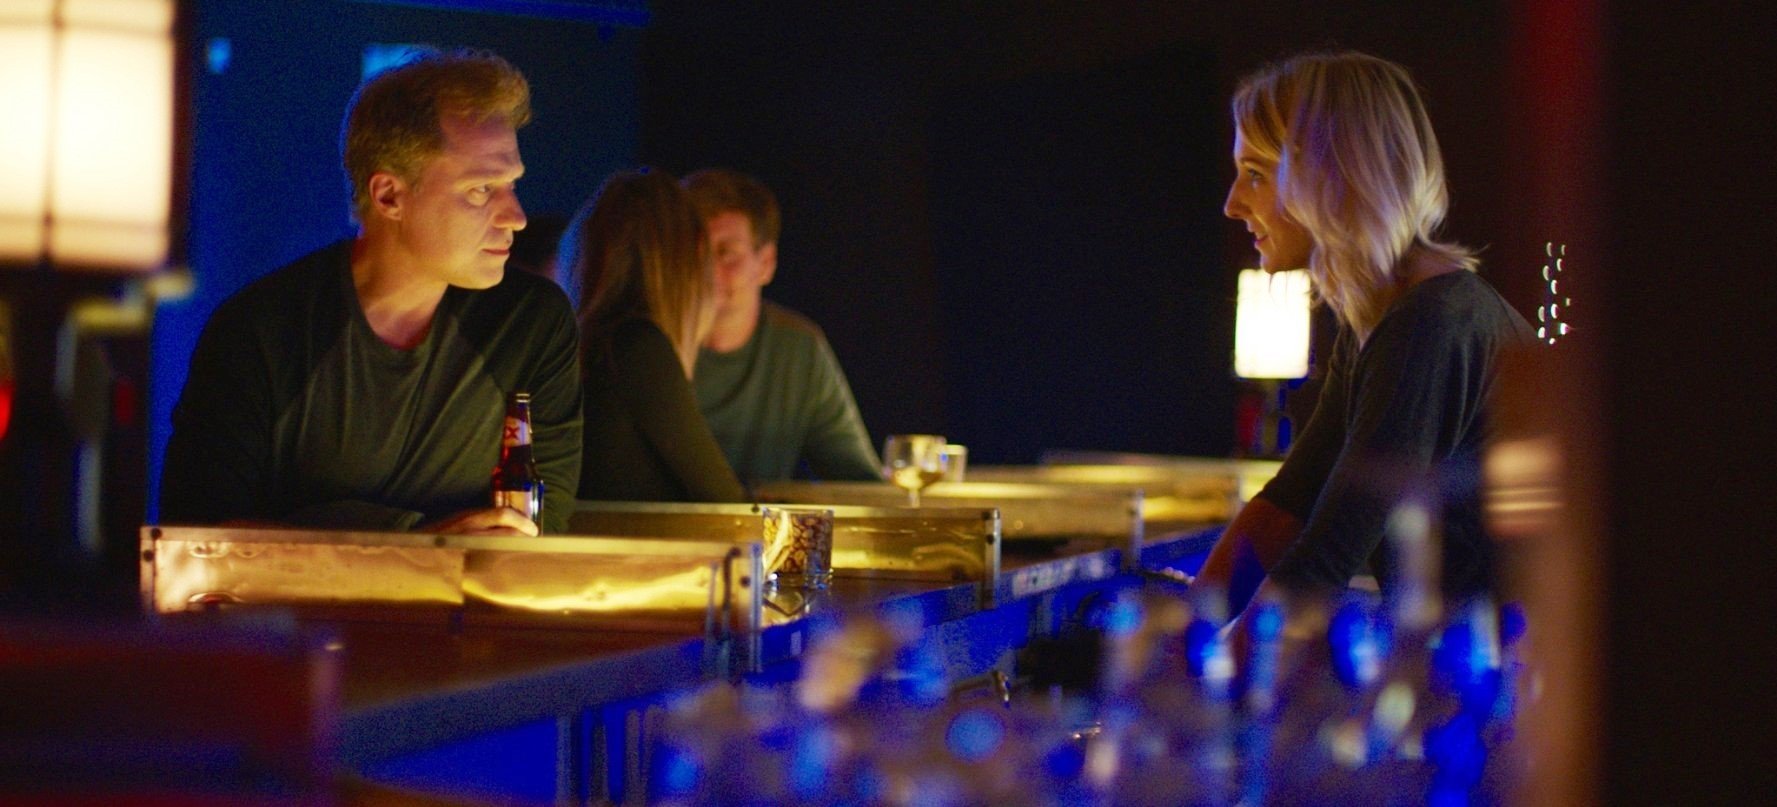 Henry Phillips and Nikki Glaser (Claire the Bartender) in Well Go USA's Punching Henry (2017)